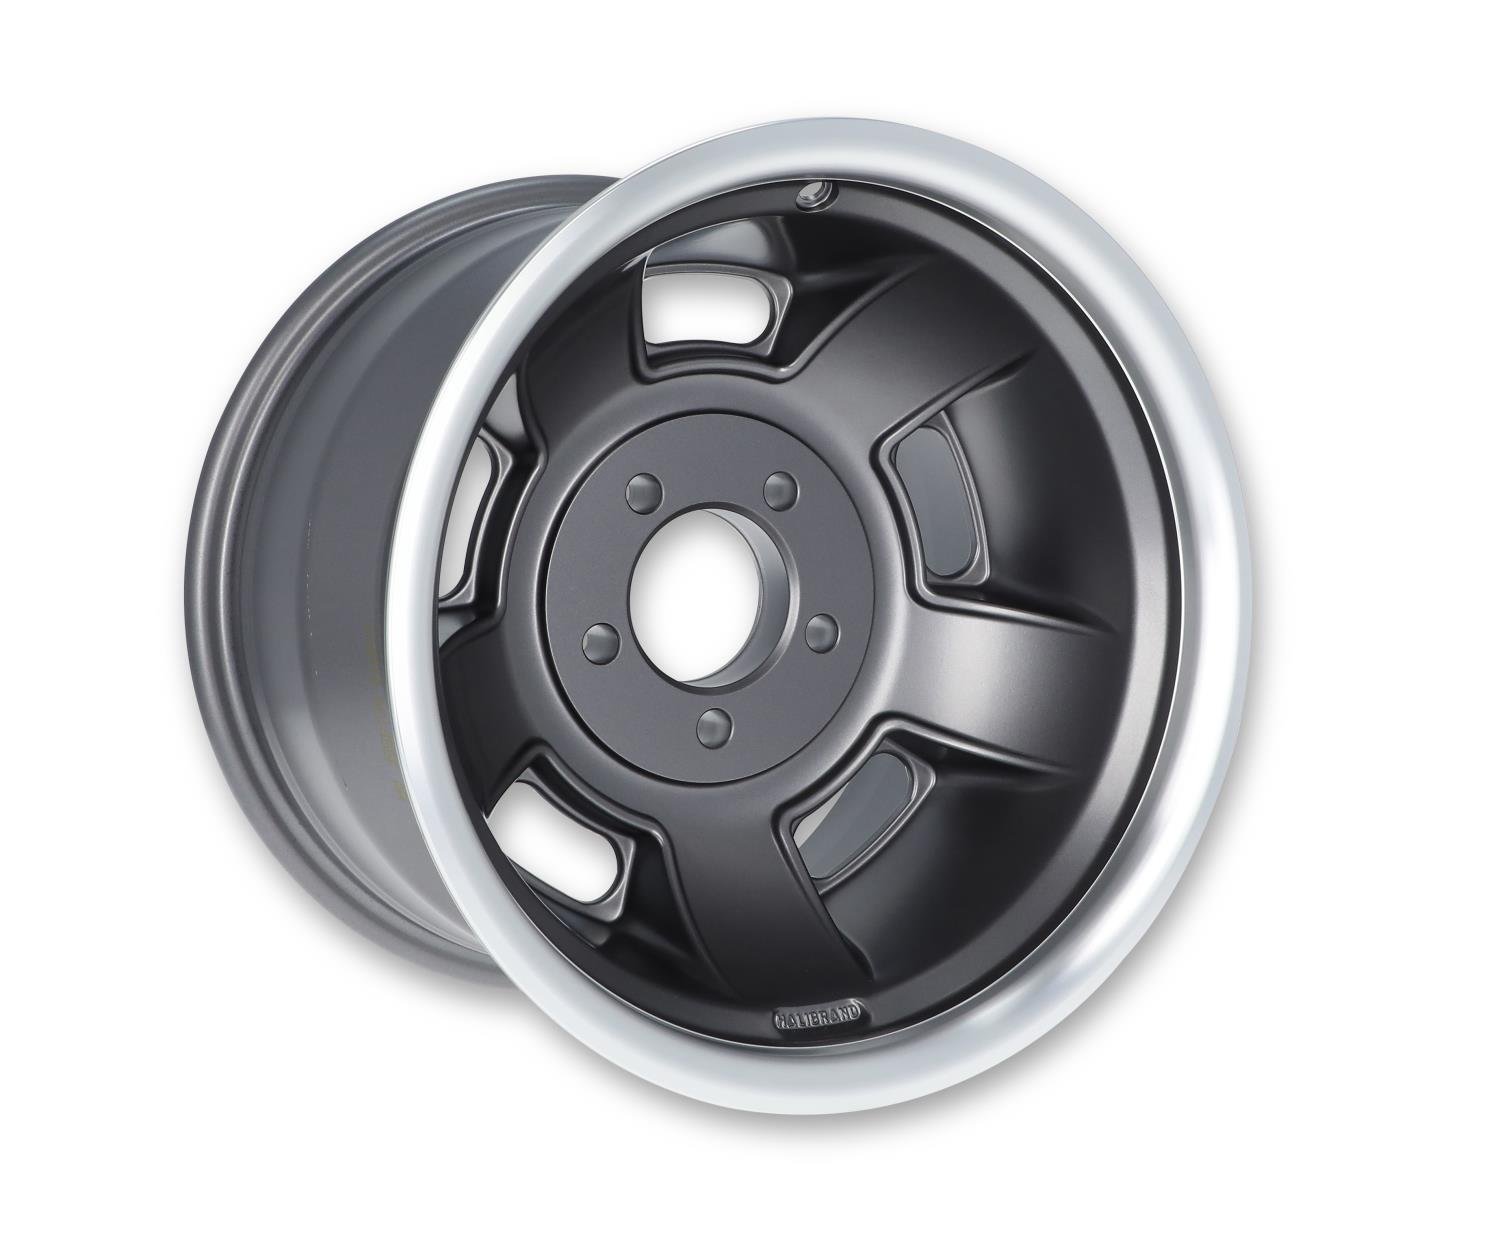 Sprint Rear Wheel, Size: 15x10", Bolt Pattern: 5x4.75", Backspace: 4.25" [Anthracite with Machined Lip - Semi Gloss Clearcoat]